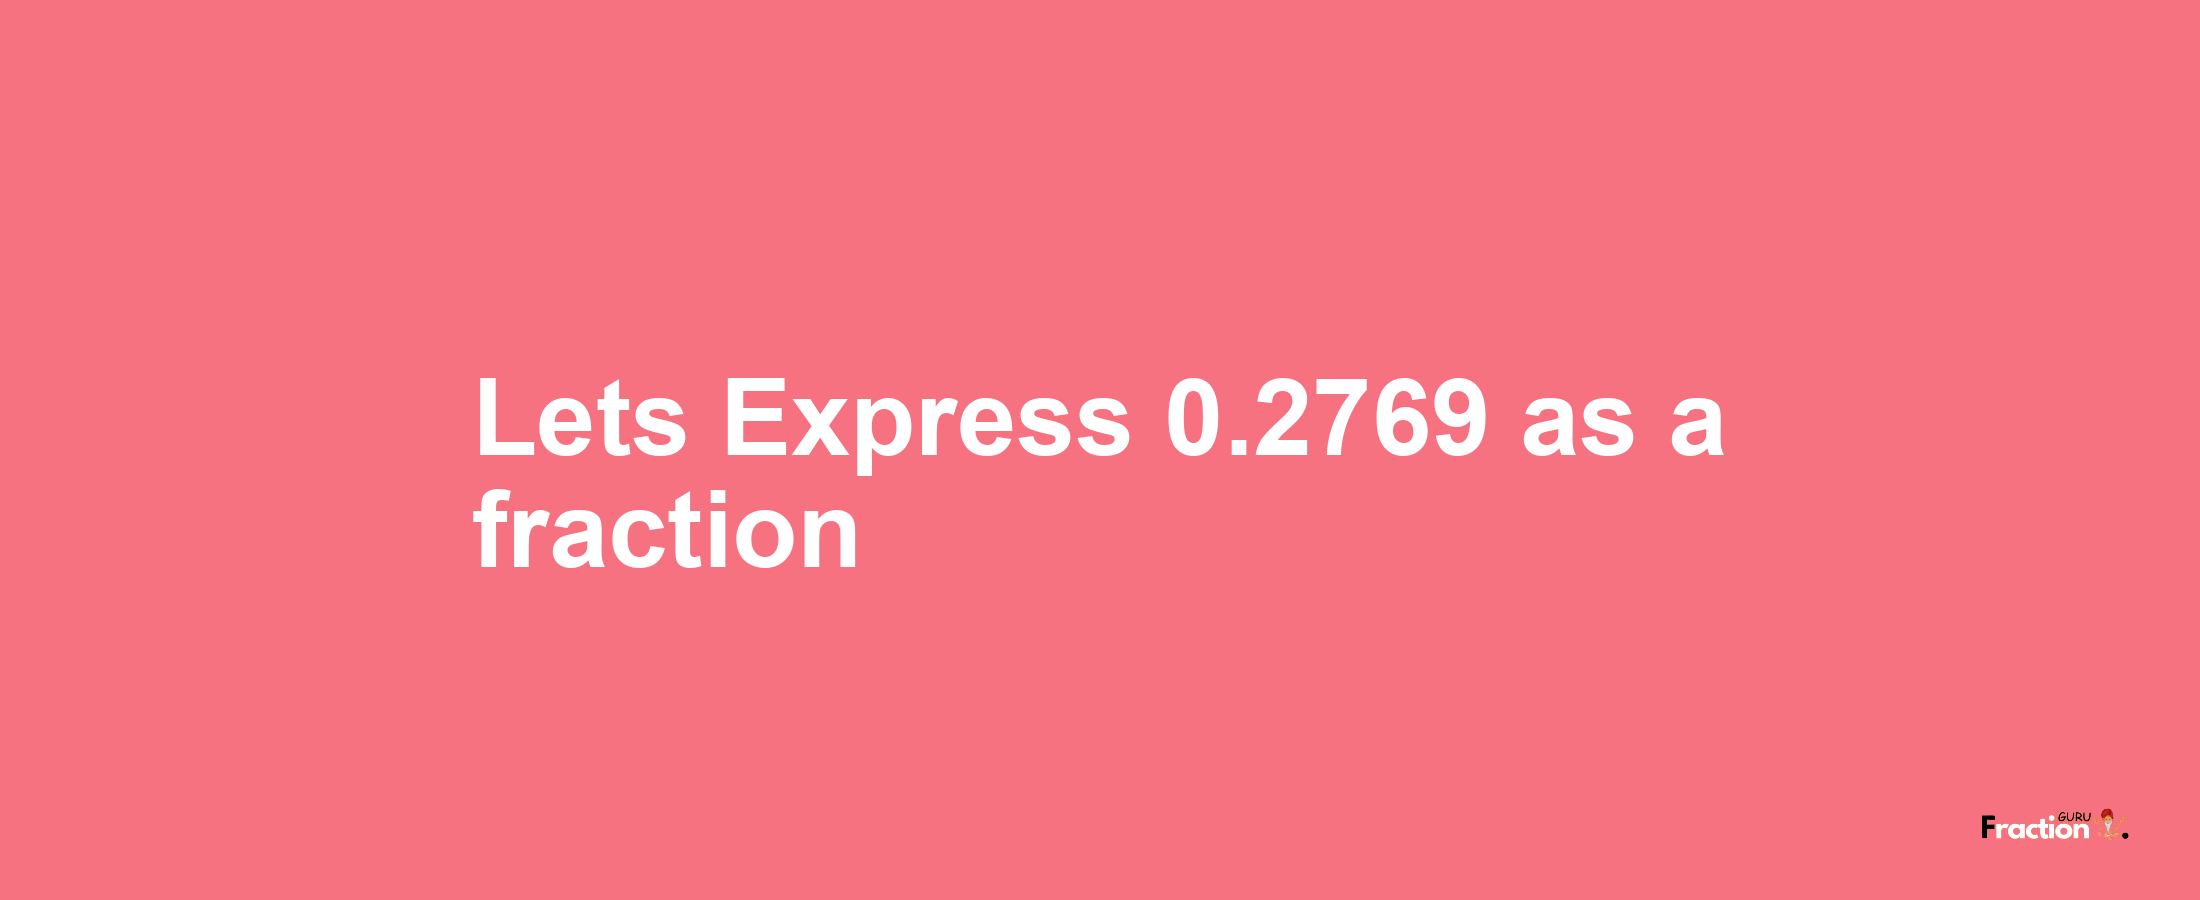 Lets Express 0.2769 as afraction